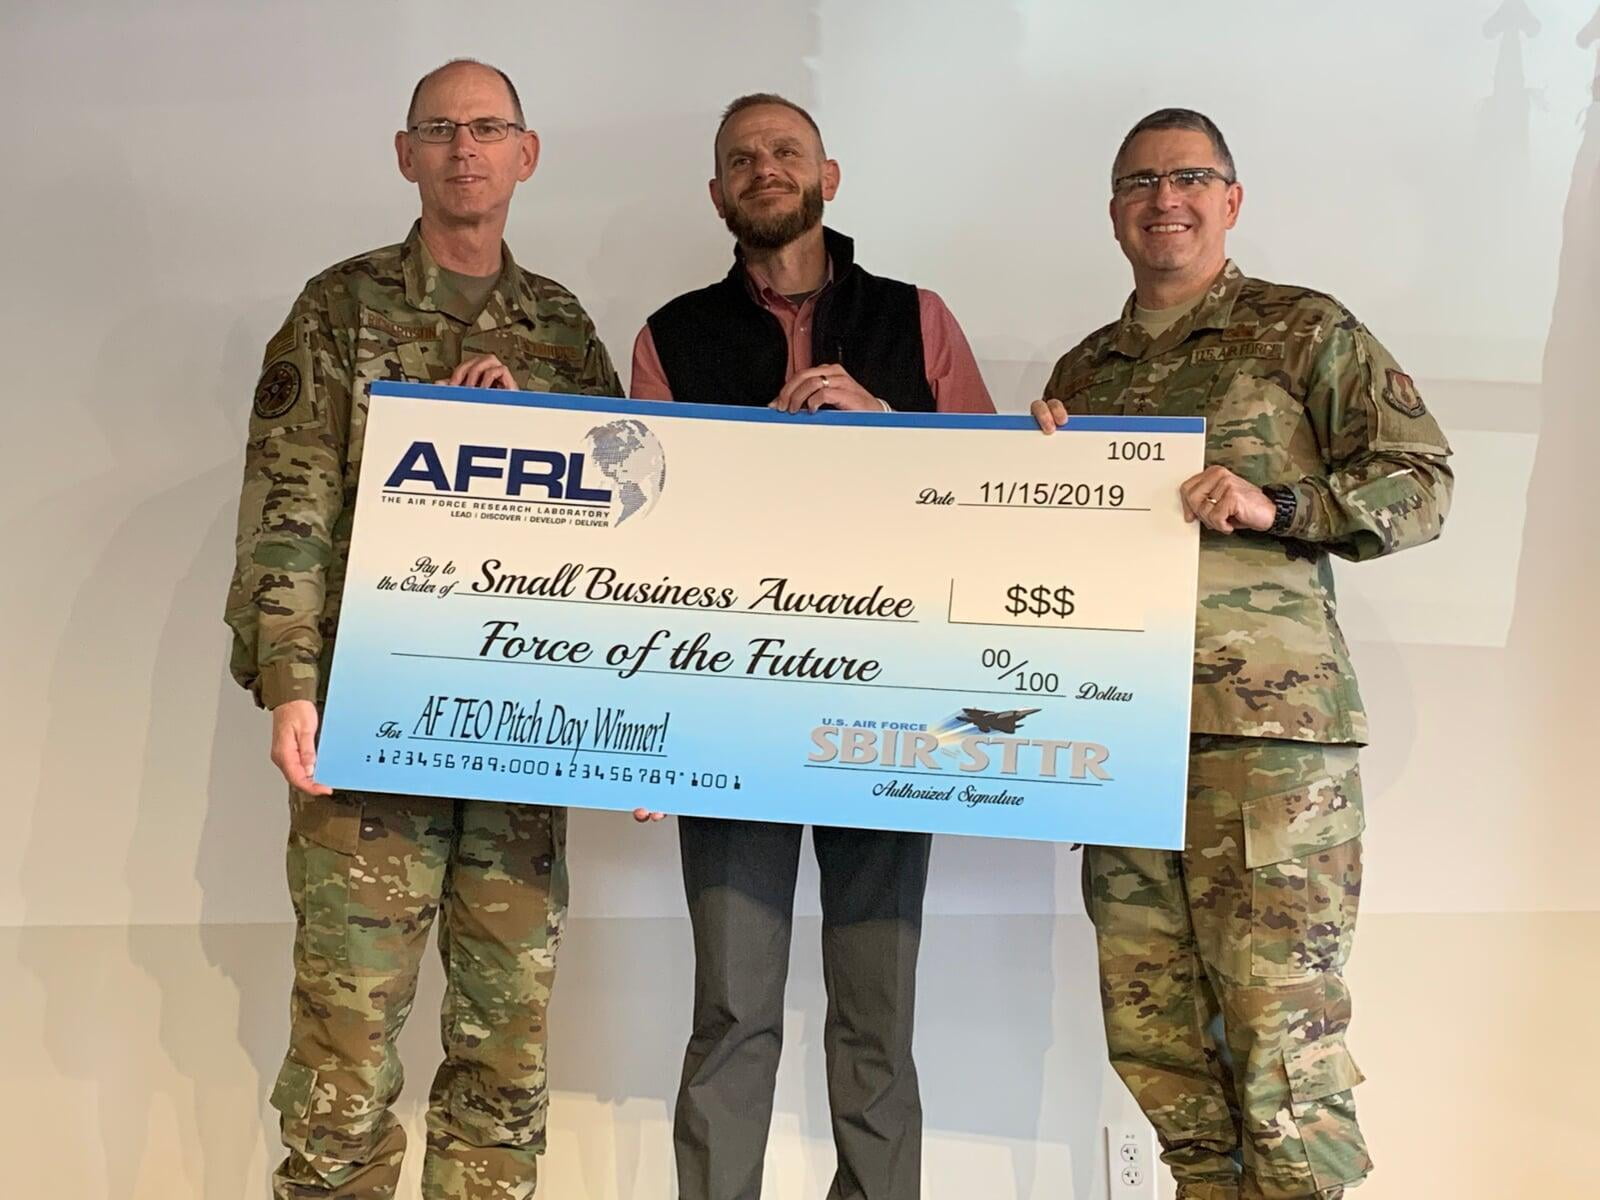 Big Awards for Small Business at the Air Force TEO Pitch Day Event